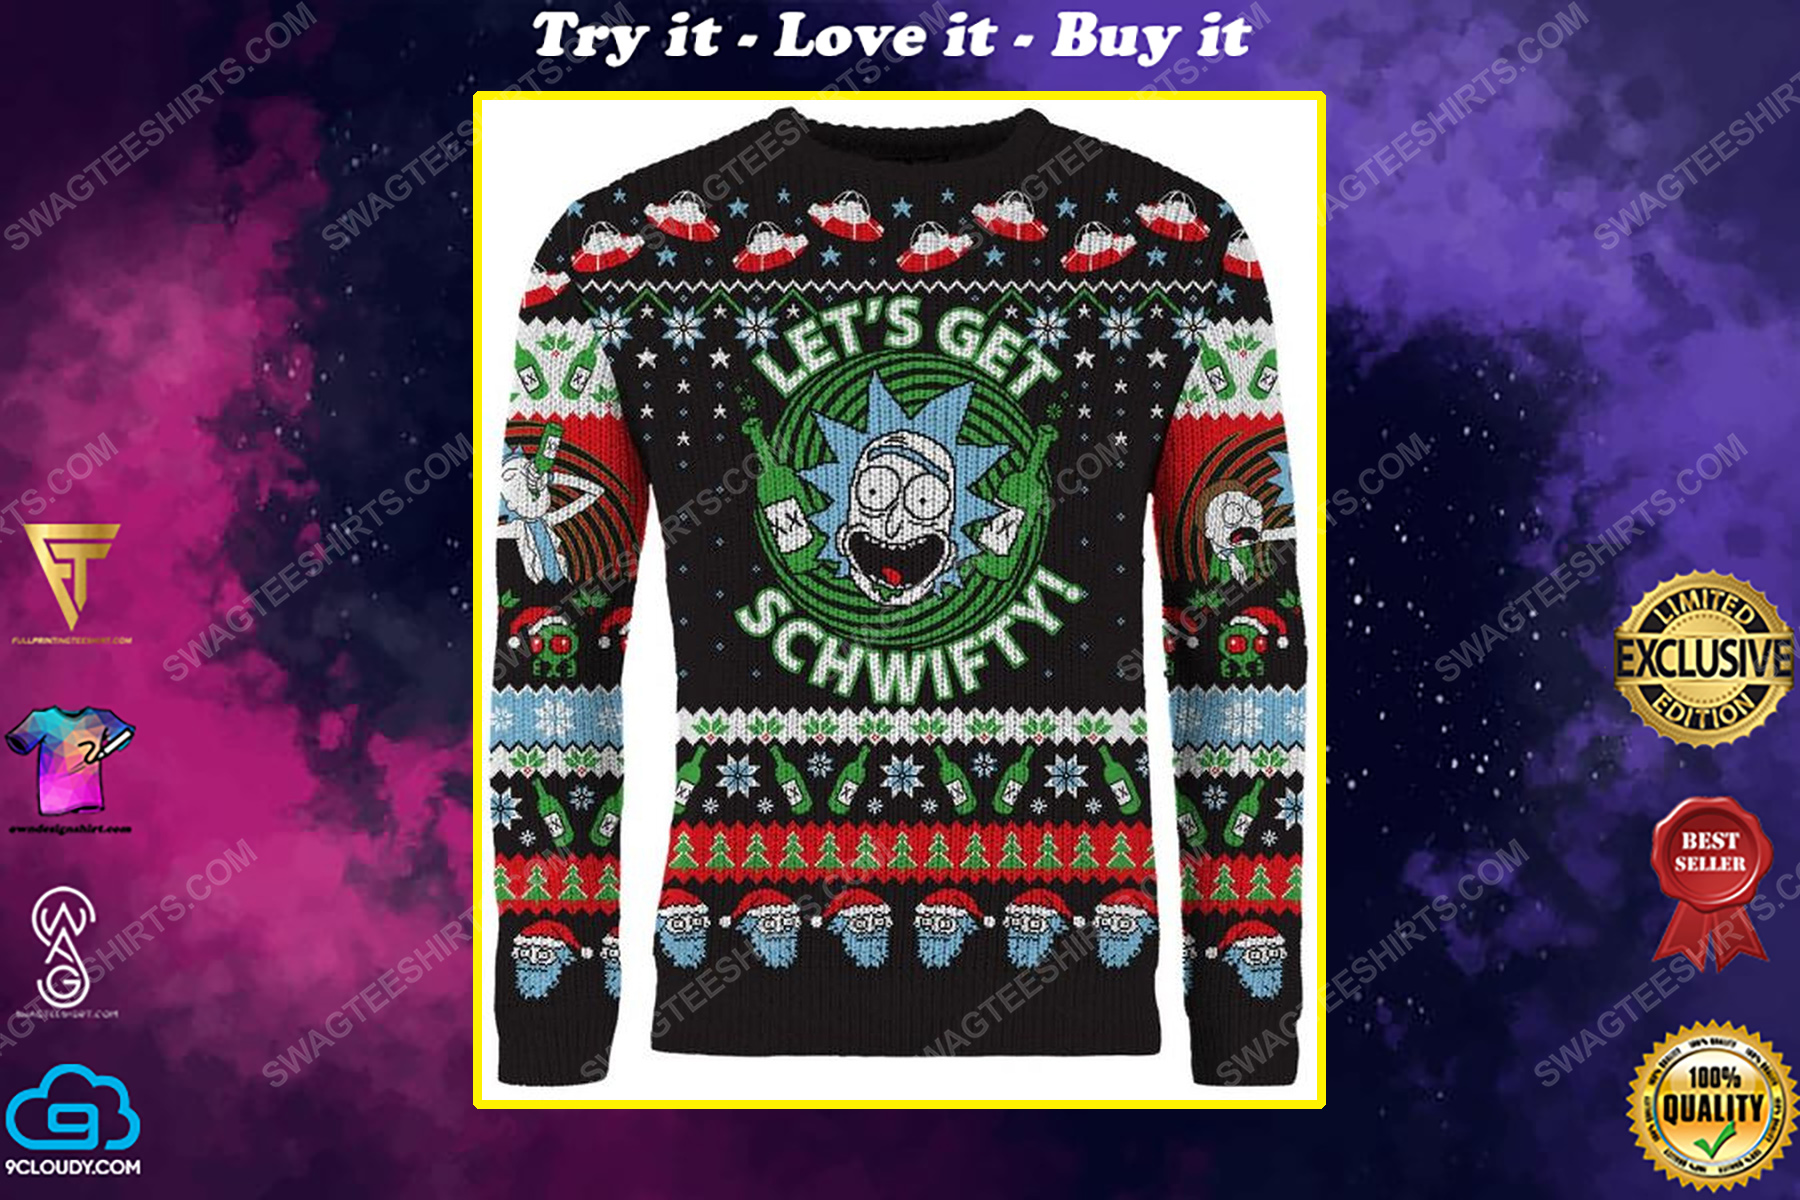 Rick and morty let's get schwifty full print ugly christmas sweater